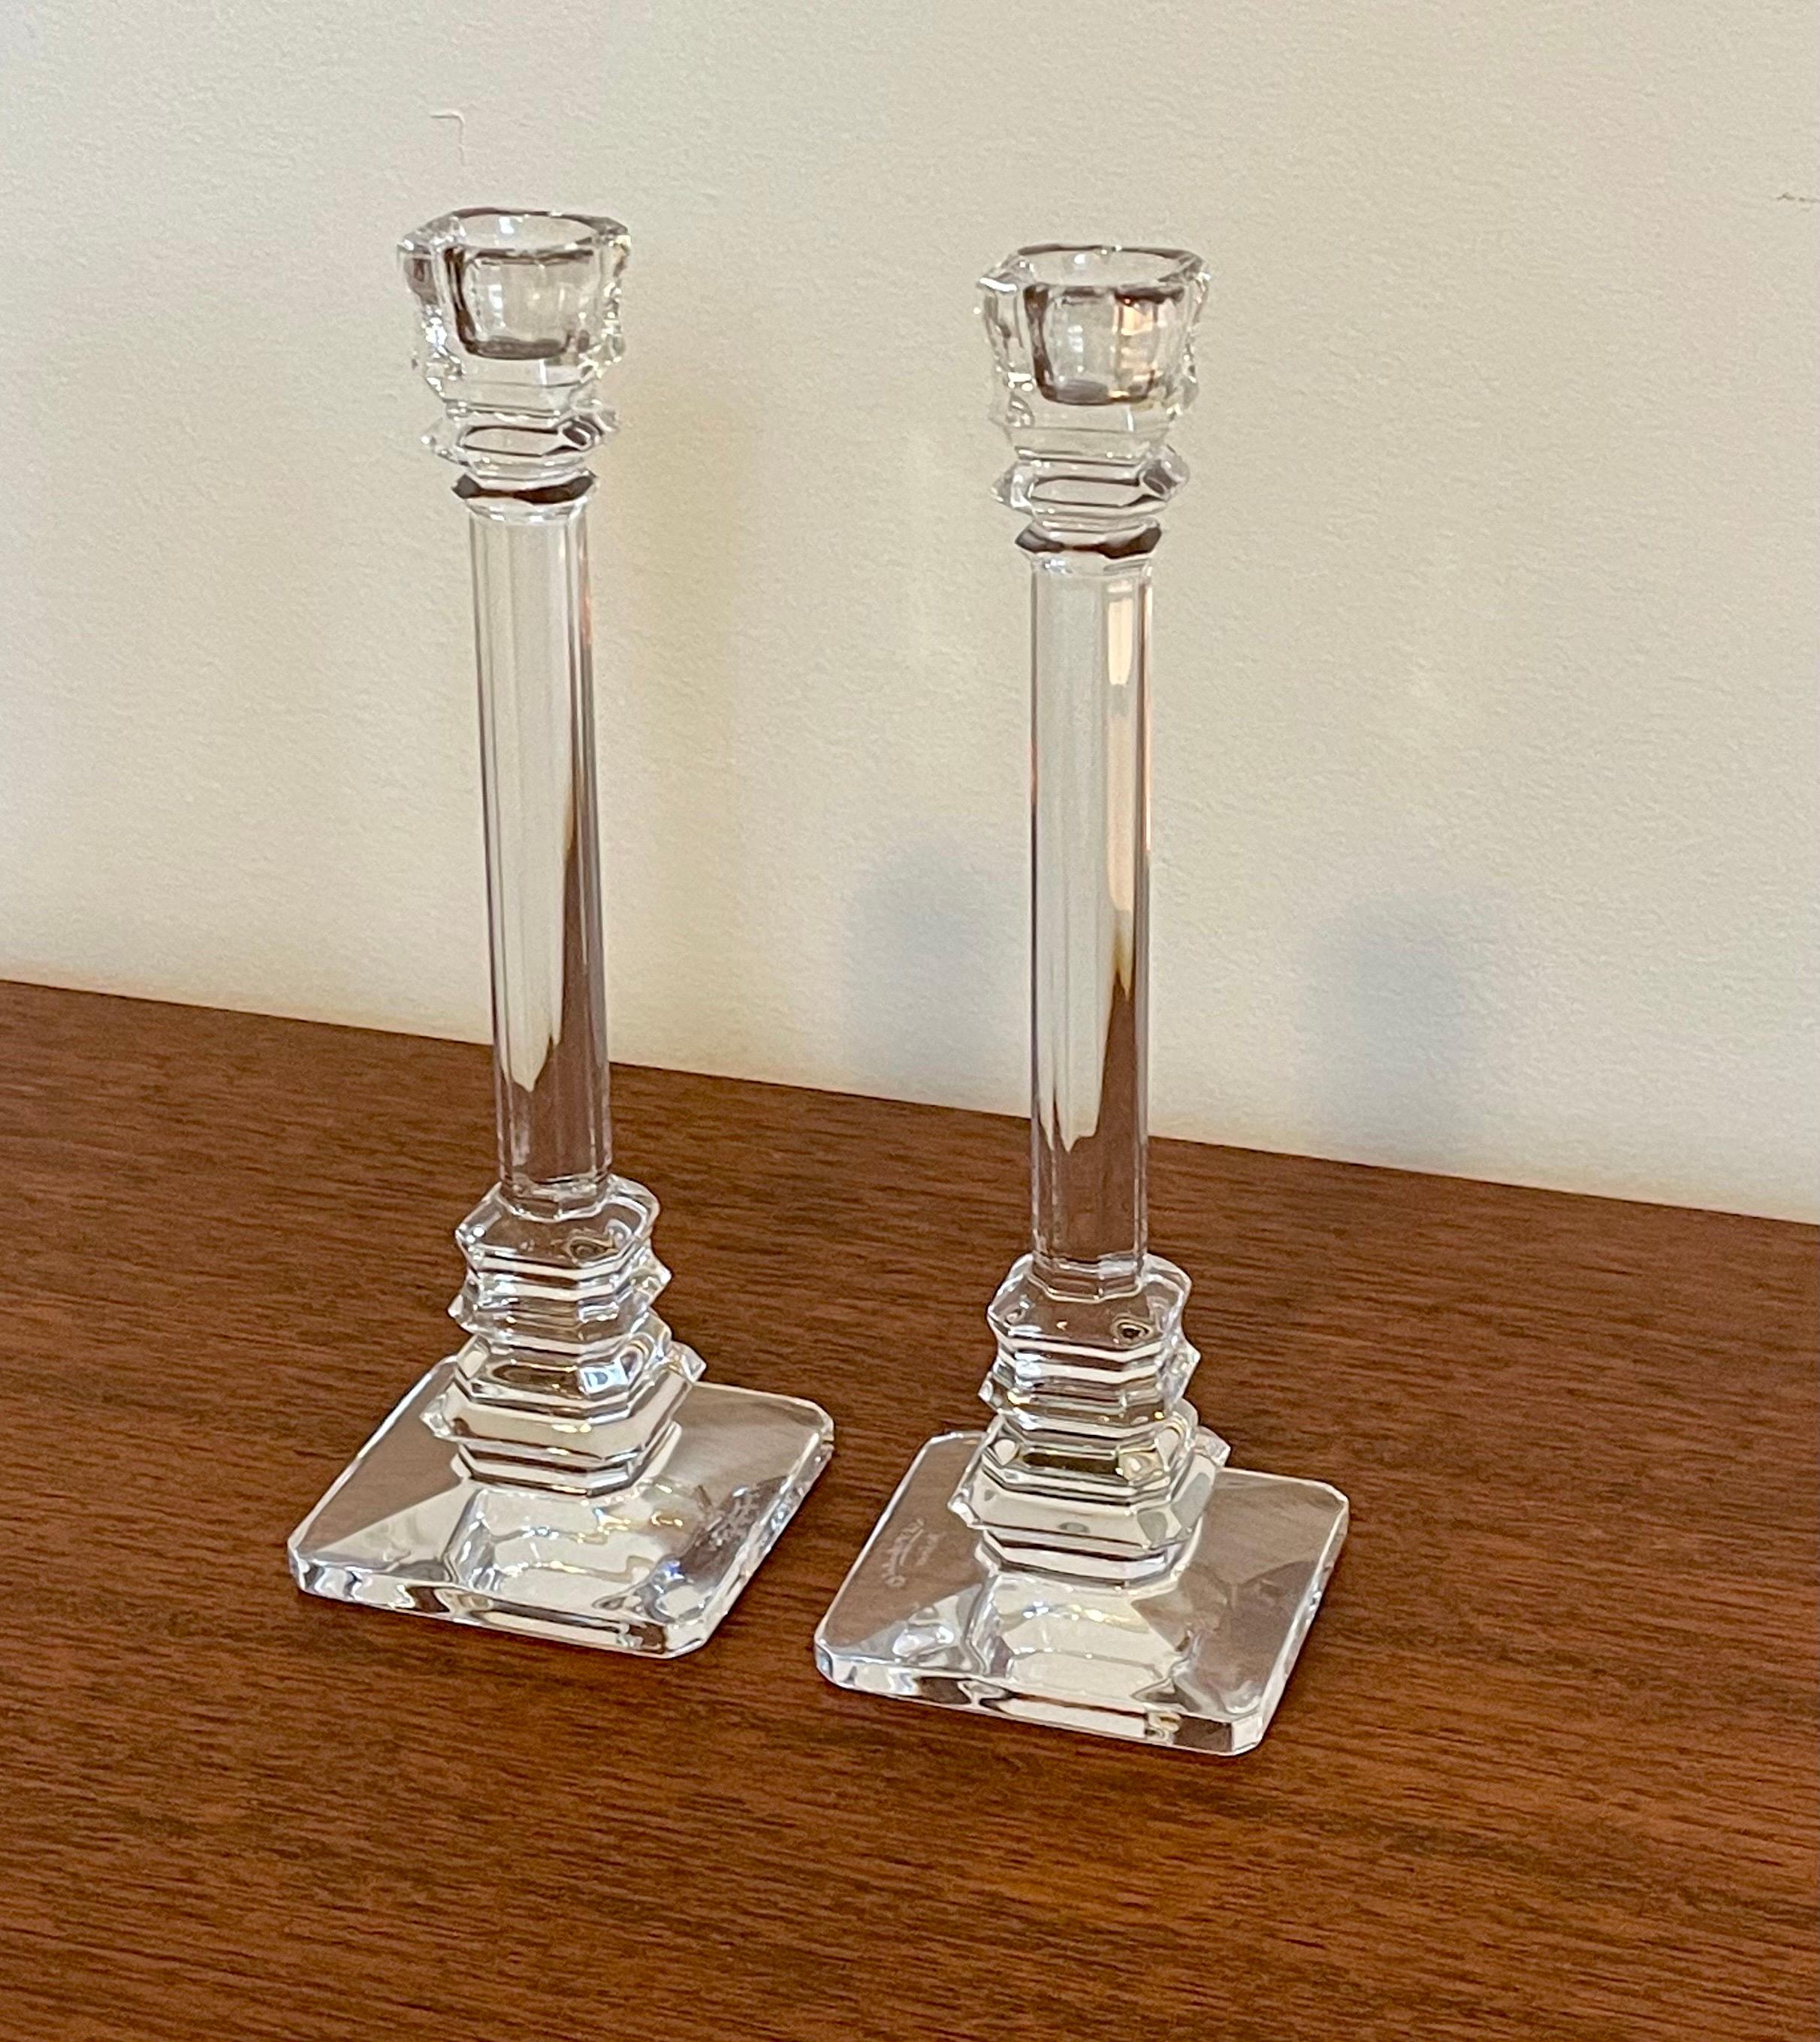 Beautiful pair of crystal candle stick holders by Val Saint Lambert for Tiffany & Co.